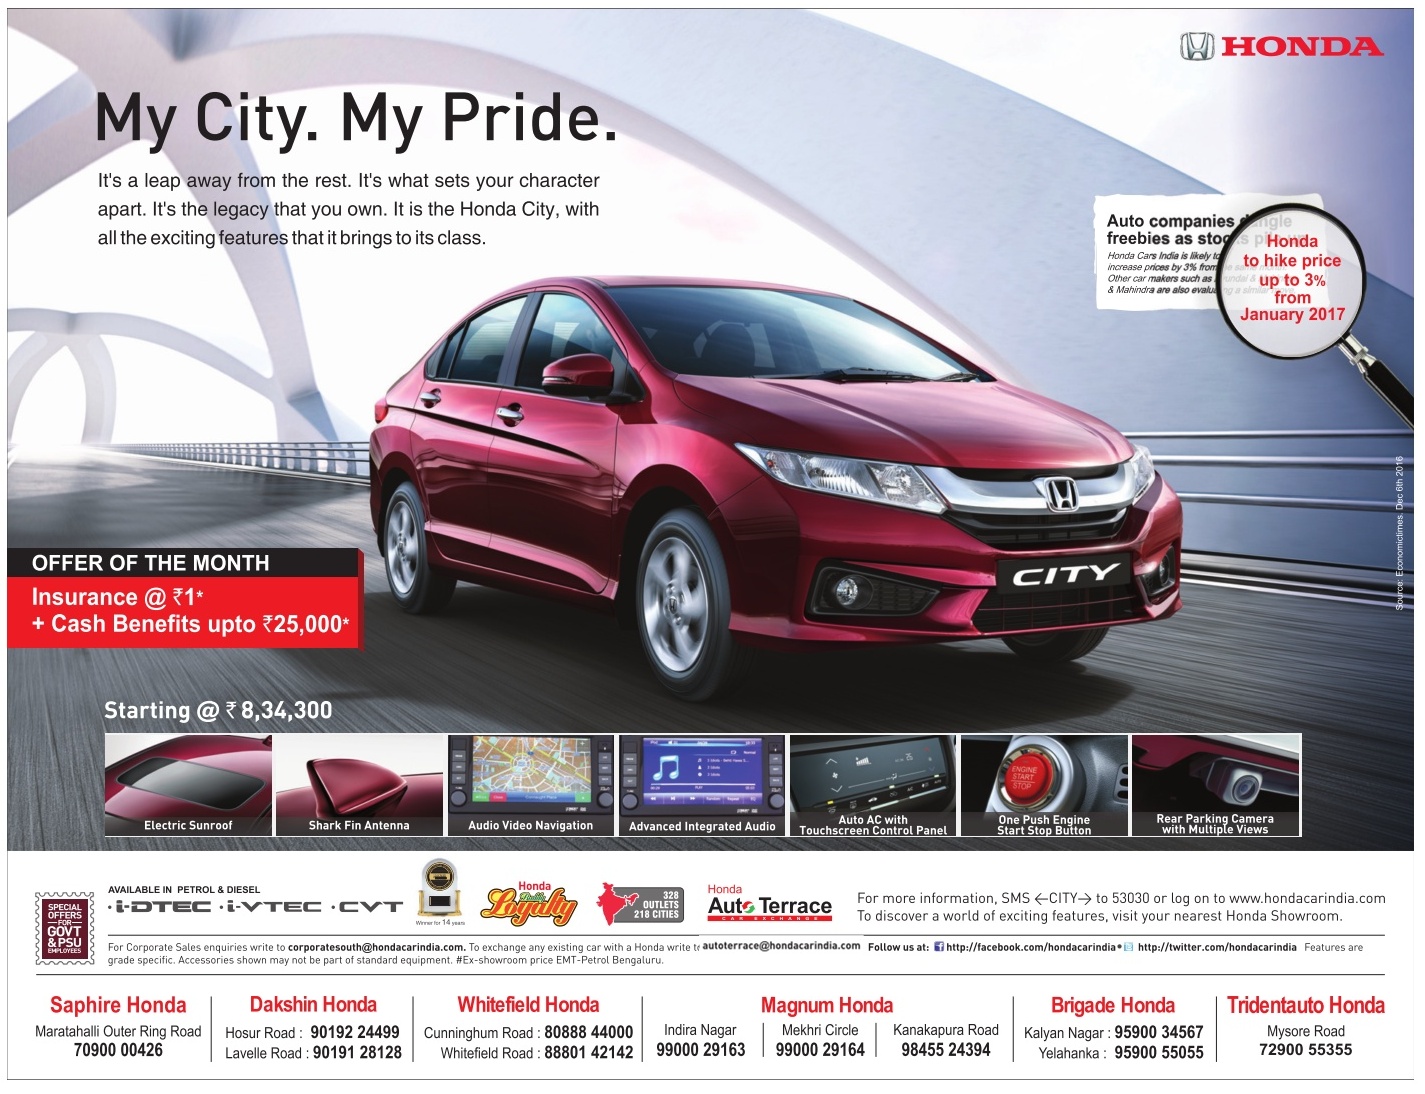 Honda cars Zero (0) down payment, Best exchange rates and Best